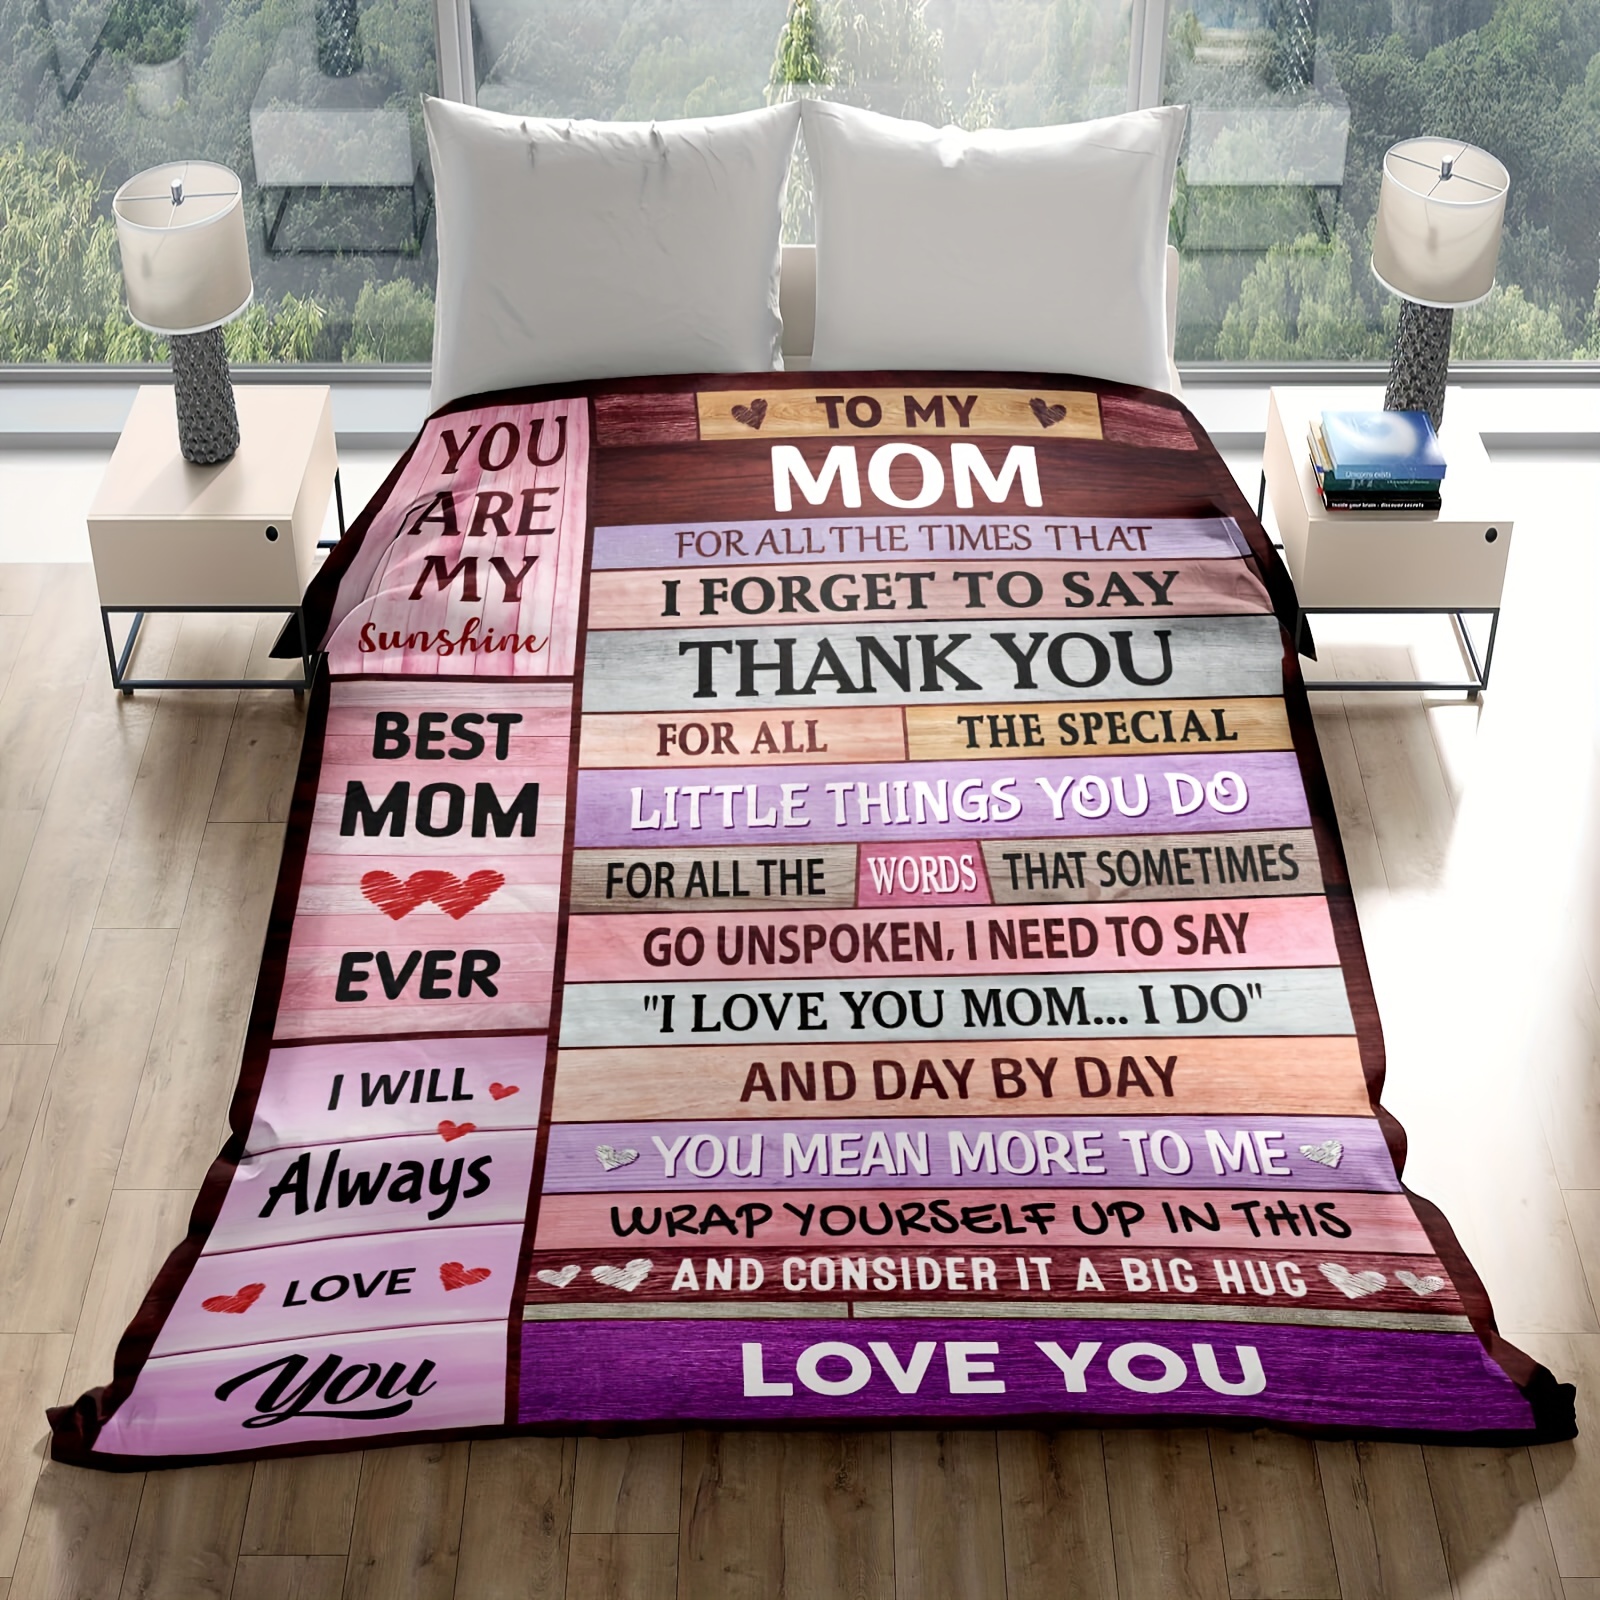 ARTHMOM Personalized Blanket Gifts for Mom Dad, Cozy Fleece Sofa Throw  Blankets for Christmas Anniversary Valentines Birthday Day (to Mom from